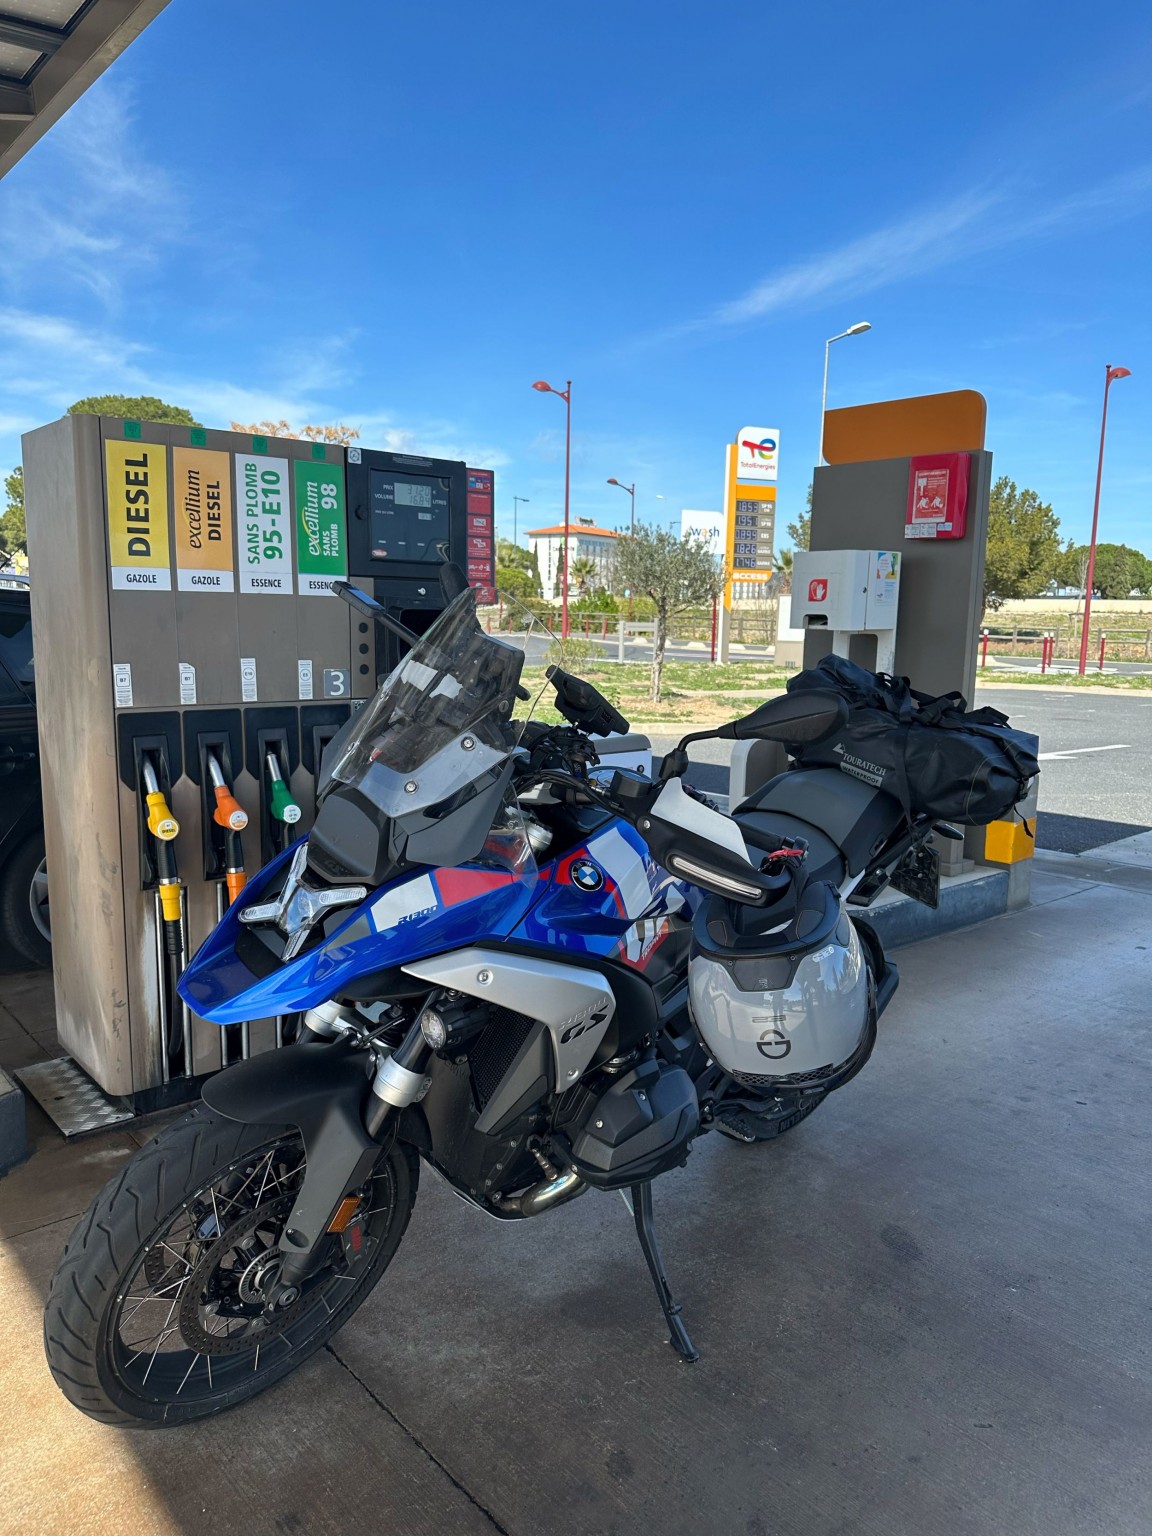 BMW R 1300 GS road test - from Barcelona to Vienna - Image 48